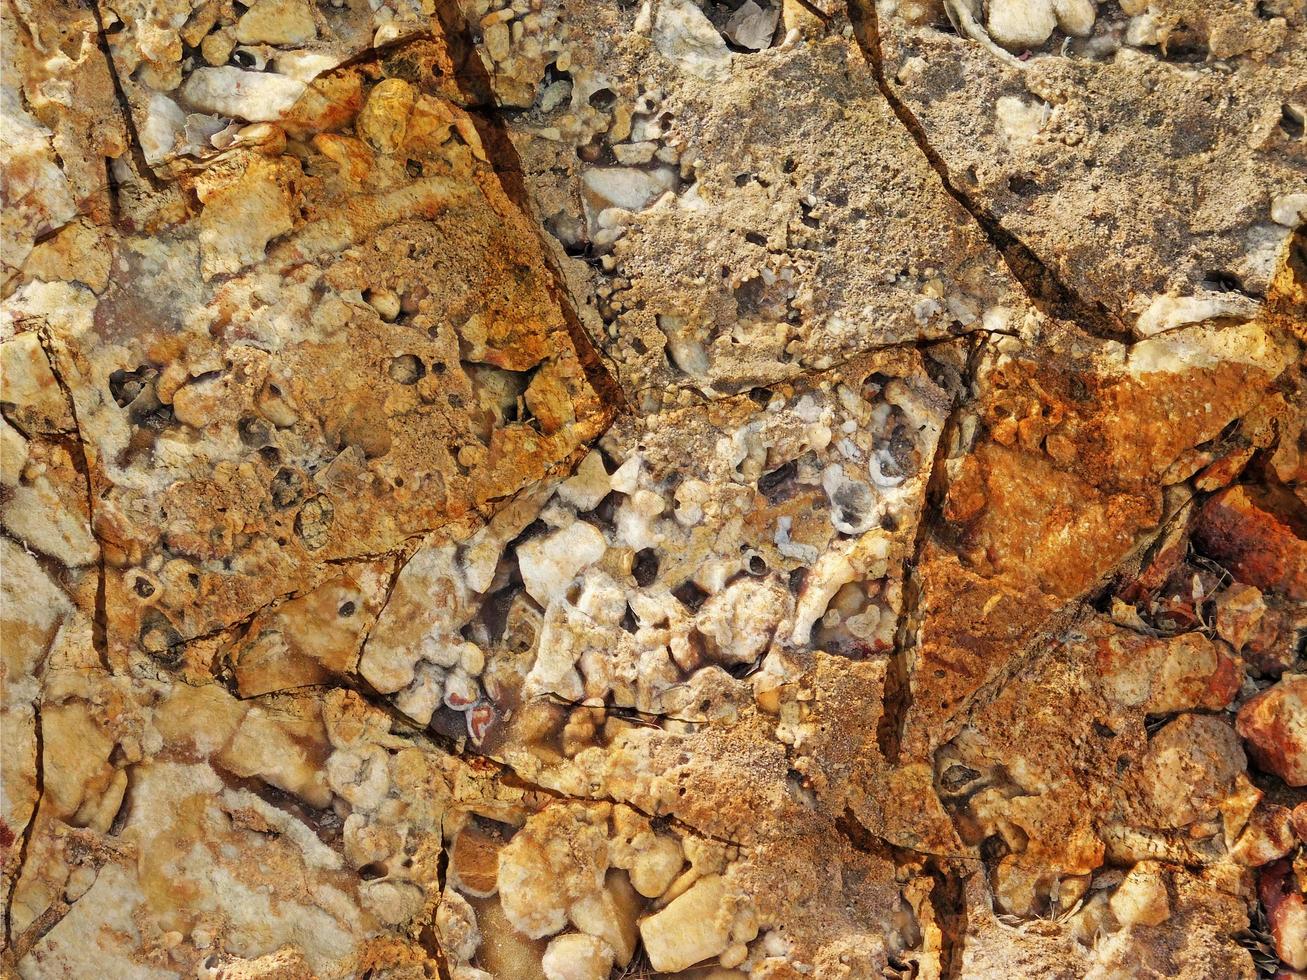 Close-up of stone or rock wall for background or texture photo